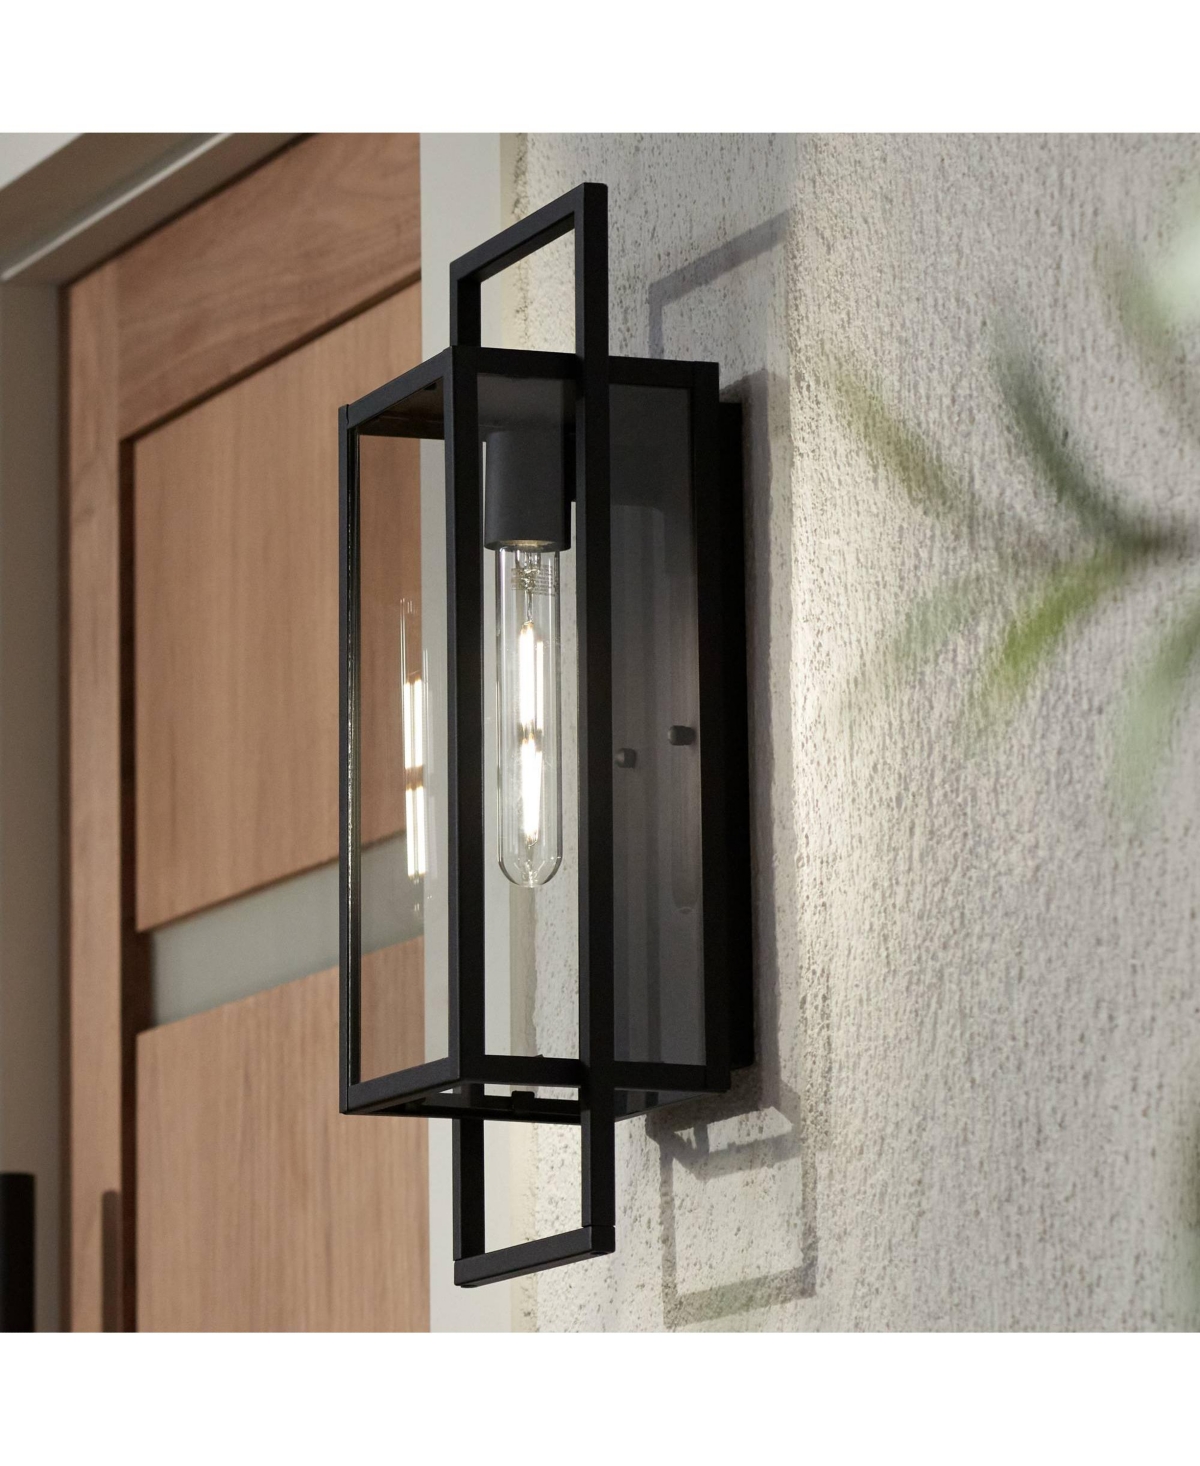 Jericho Modern Industrial Outdoor Wall Light Fixture Textured Black Metal 19" Clear Glass Panel for Exterior House Porch Patio Outside Deck Garage Yar